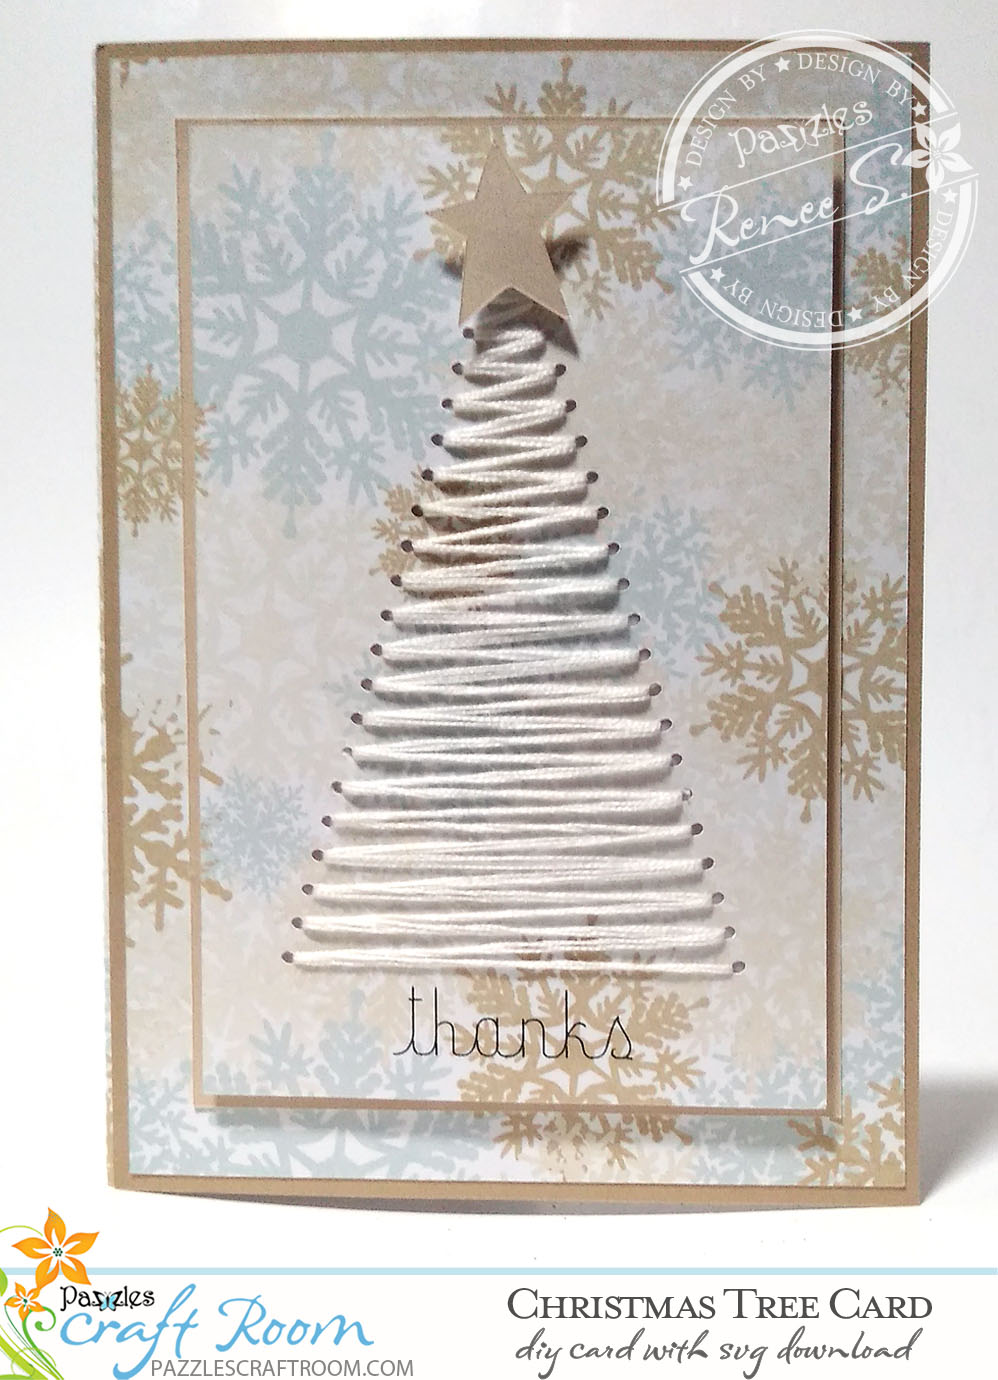 Pazzles DIY Christmas Tree Card with instant SVG download compatible with all major electronic cutters including Pazzles Inspiration, Cricut, and Silhouette Cameo. Design by Renee Smart.